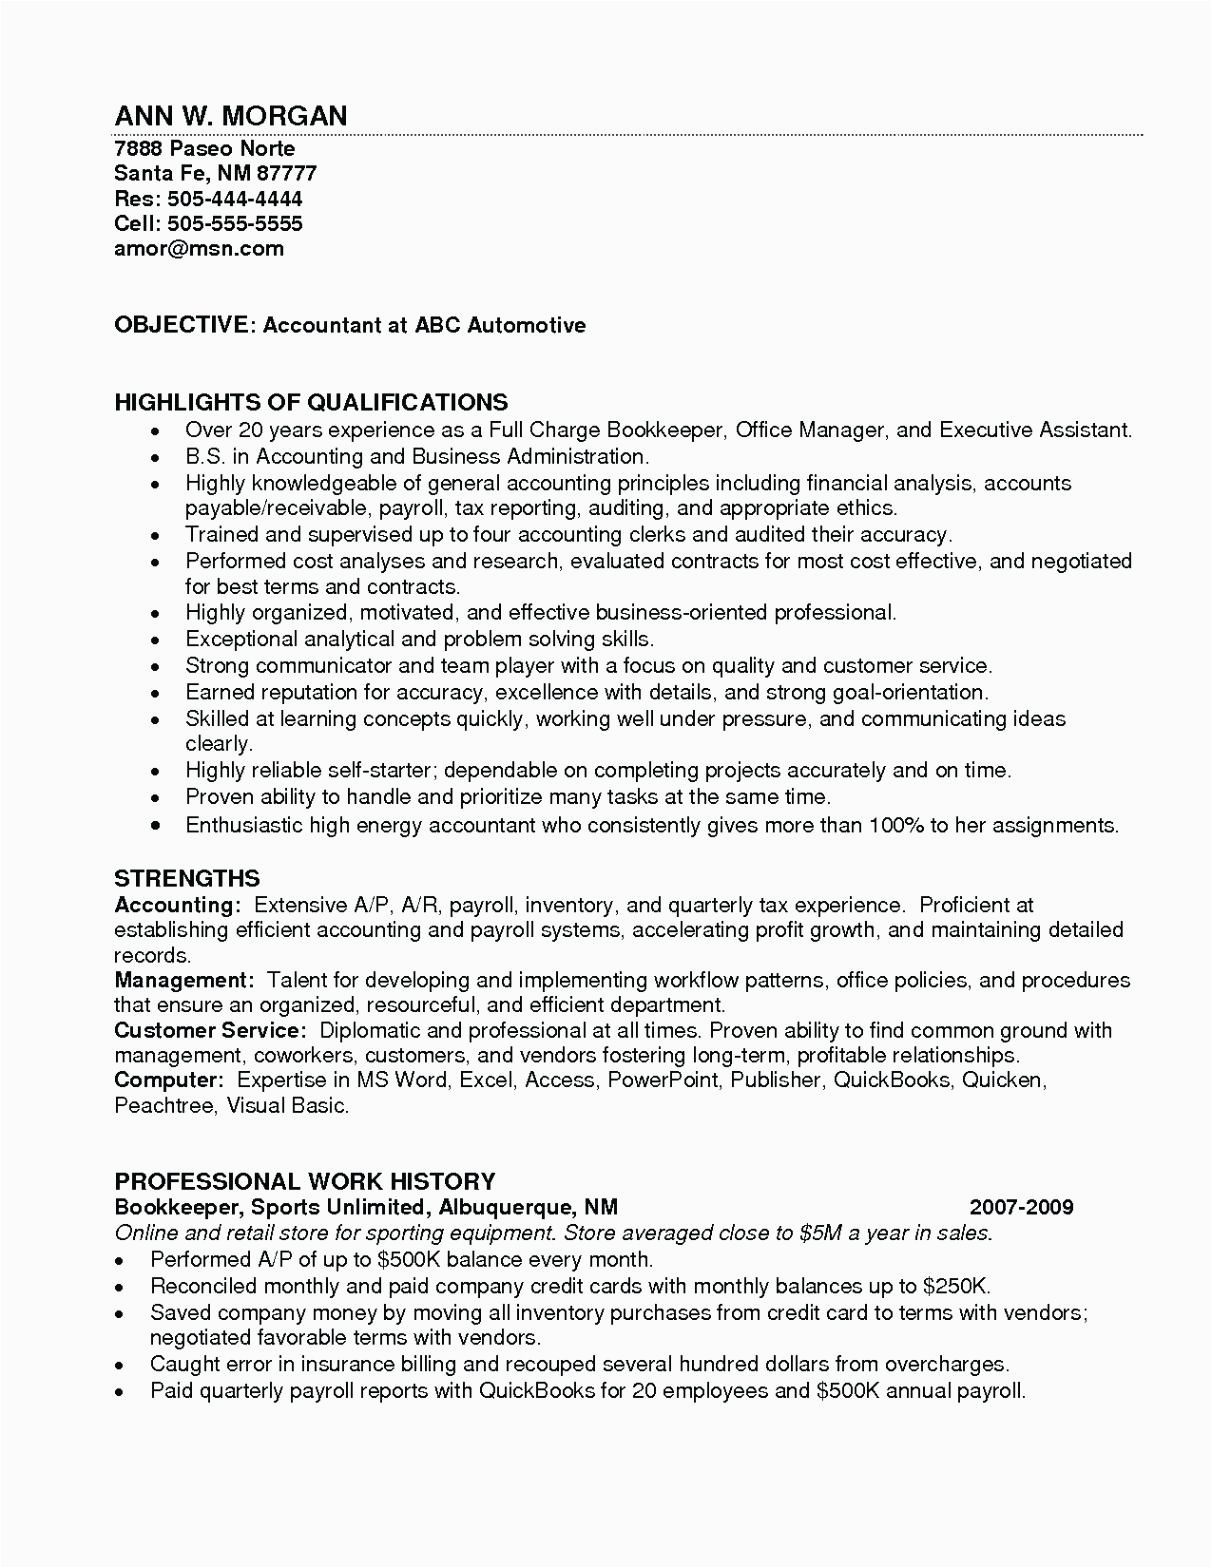 Sample Resume for Entry Level Bookkeeper Bookkeeping Resume Samples Entry Level Accounting Sample to Bookkeeping